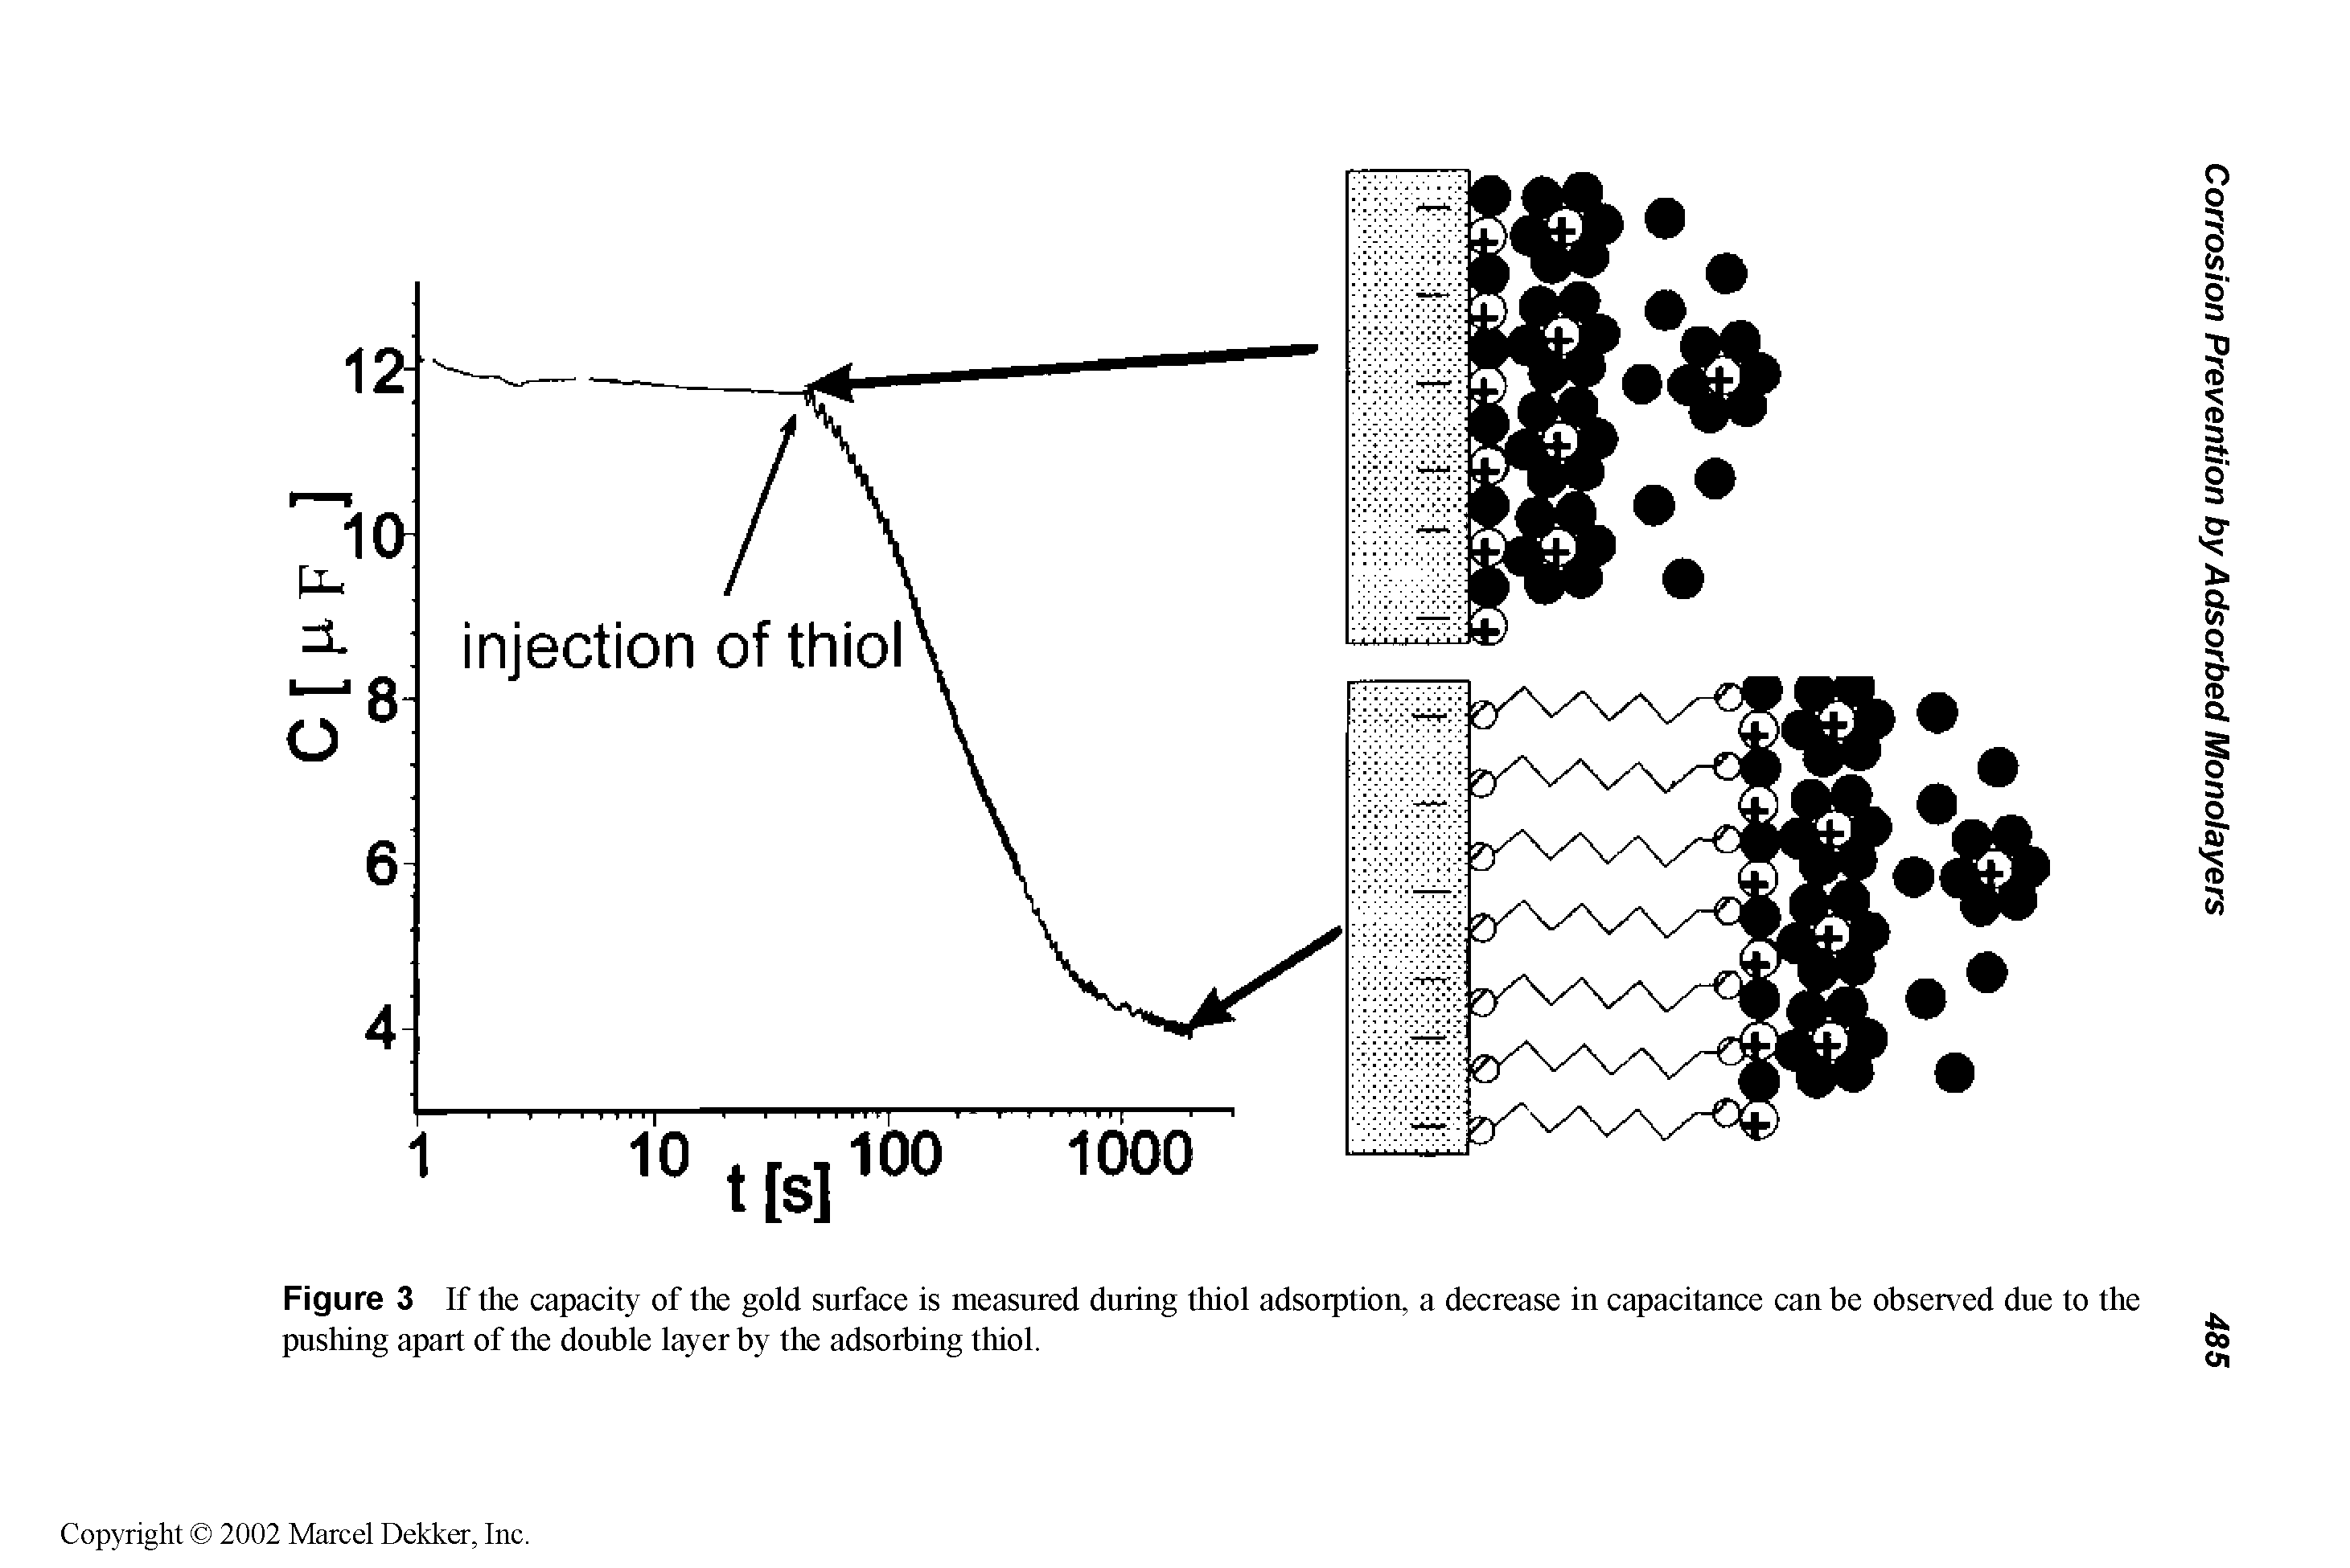 Figure 3 If the capacity of the gold surface is measured during thiol adsorption, a decrease in capacitance can be observed due to the pushing apart of the double layer by the adsorbing thiol.